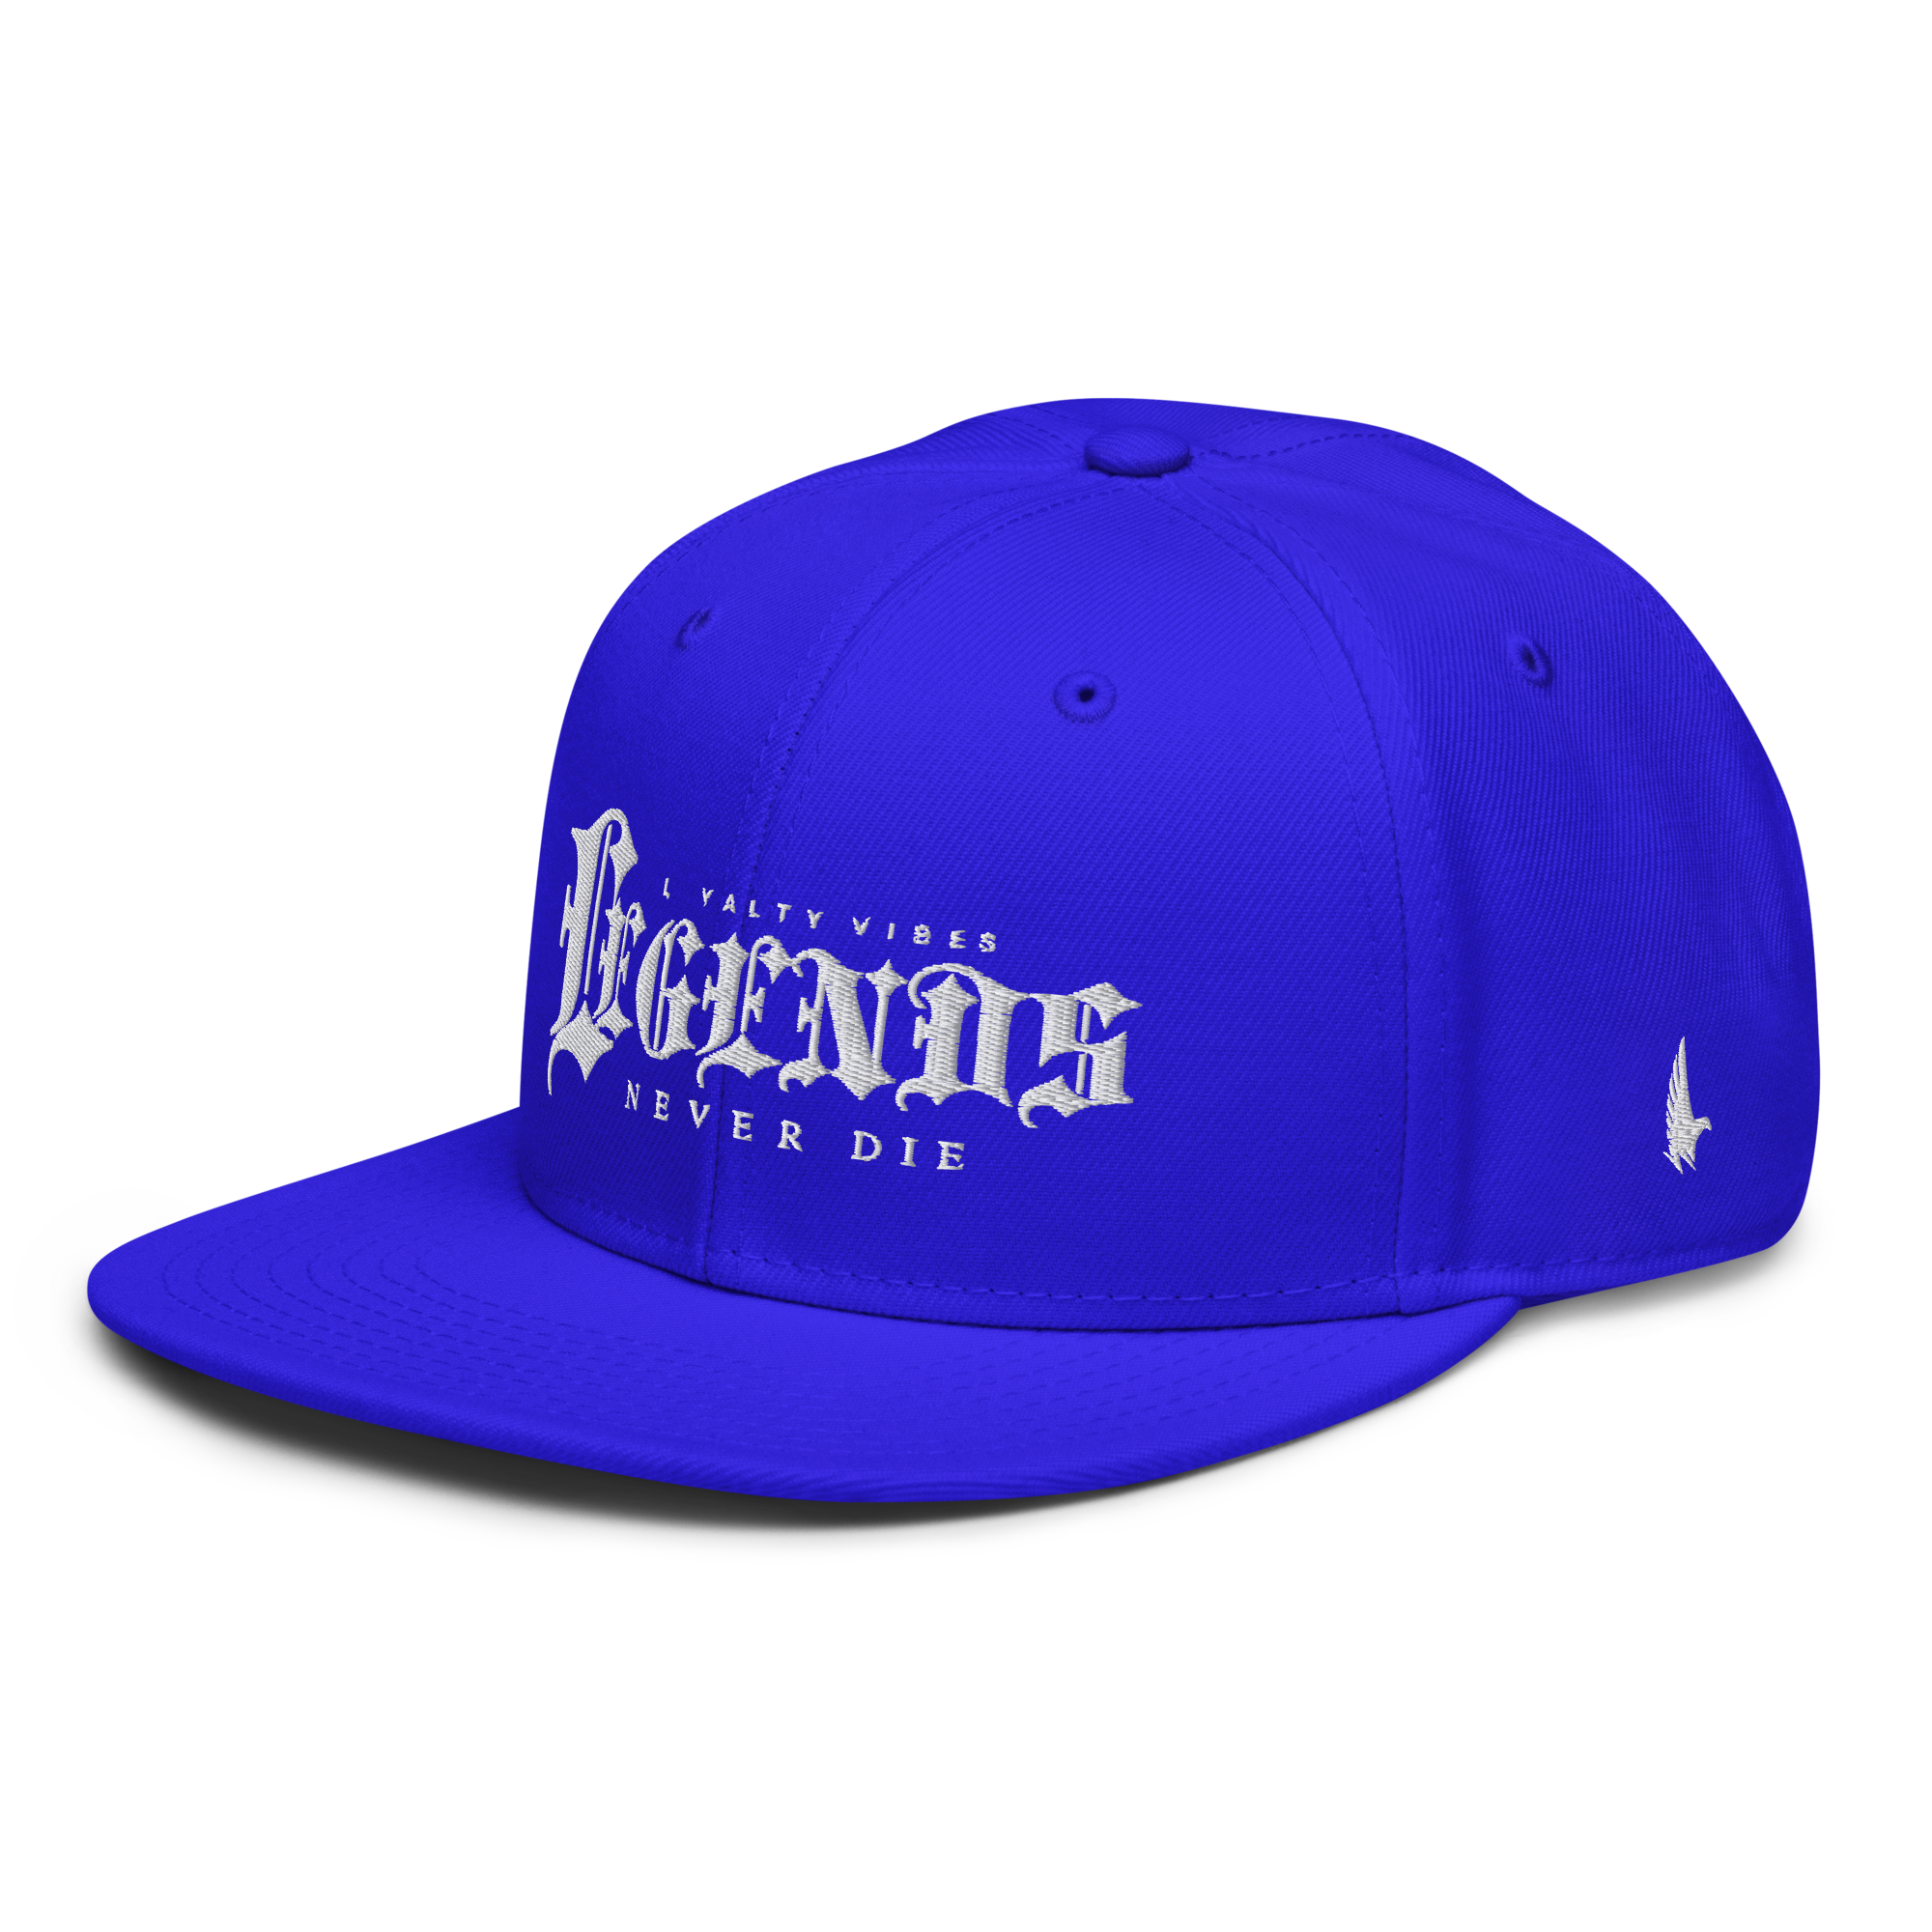 Legends Never Die Snapback Hat Blue White OS - Loyalty Vibes